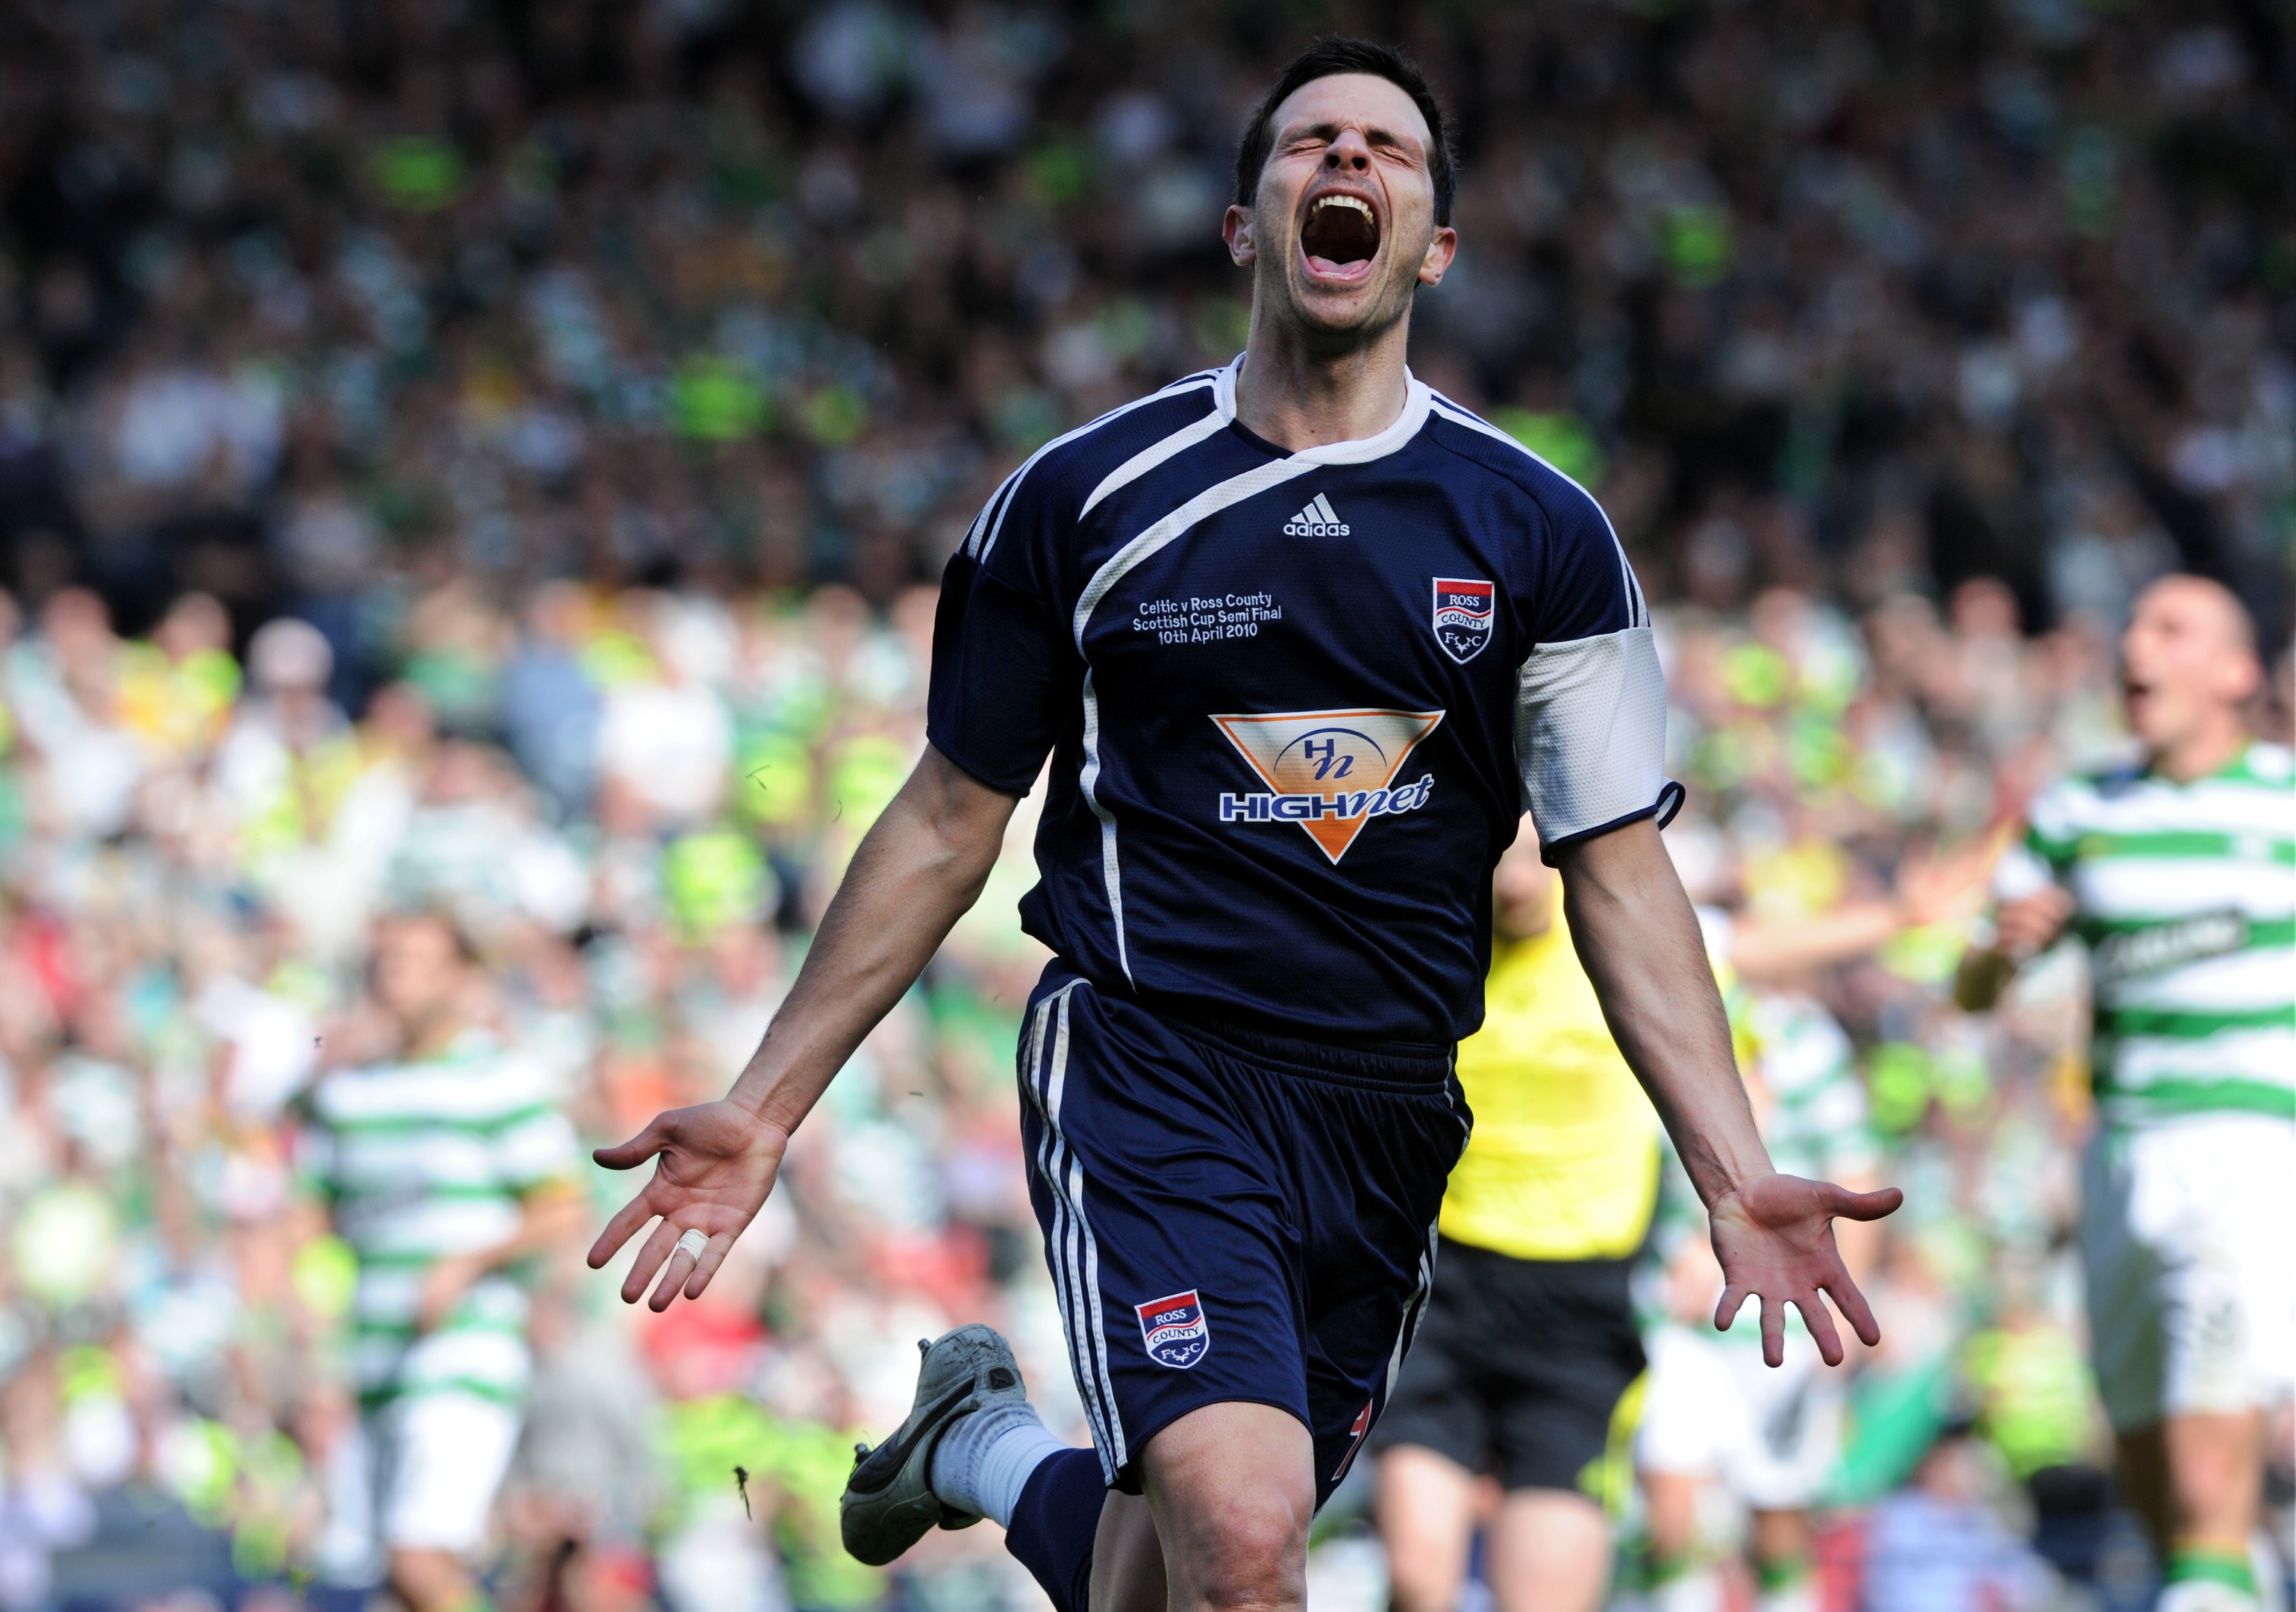 VIDEO Eight years ago today, Ross County stunned Celtic in the Hampden sun to reach their first major final